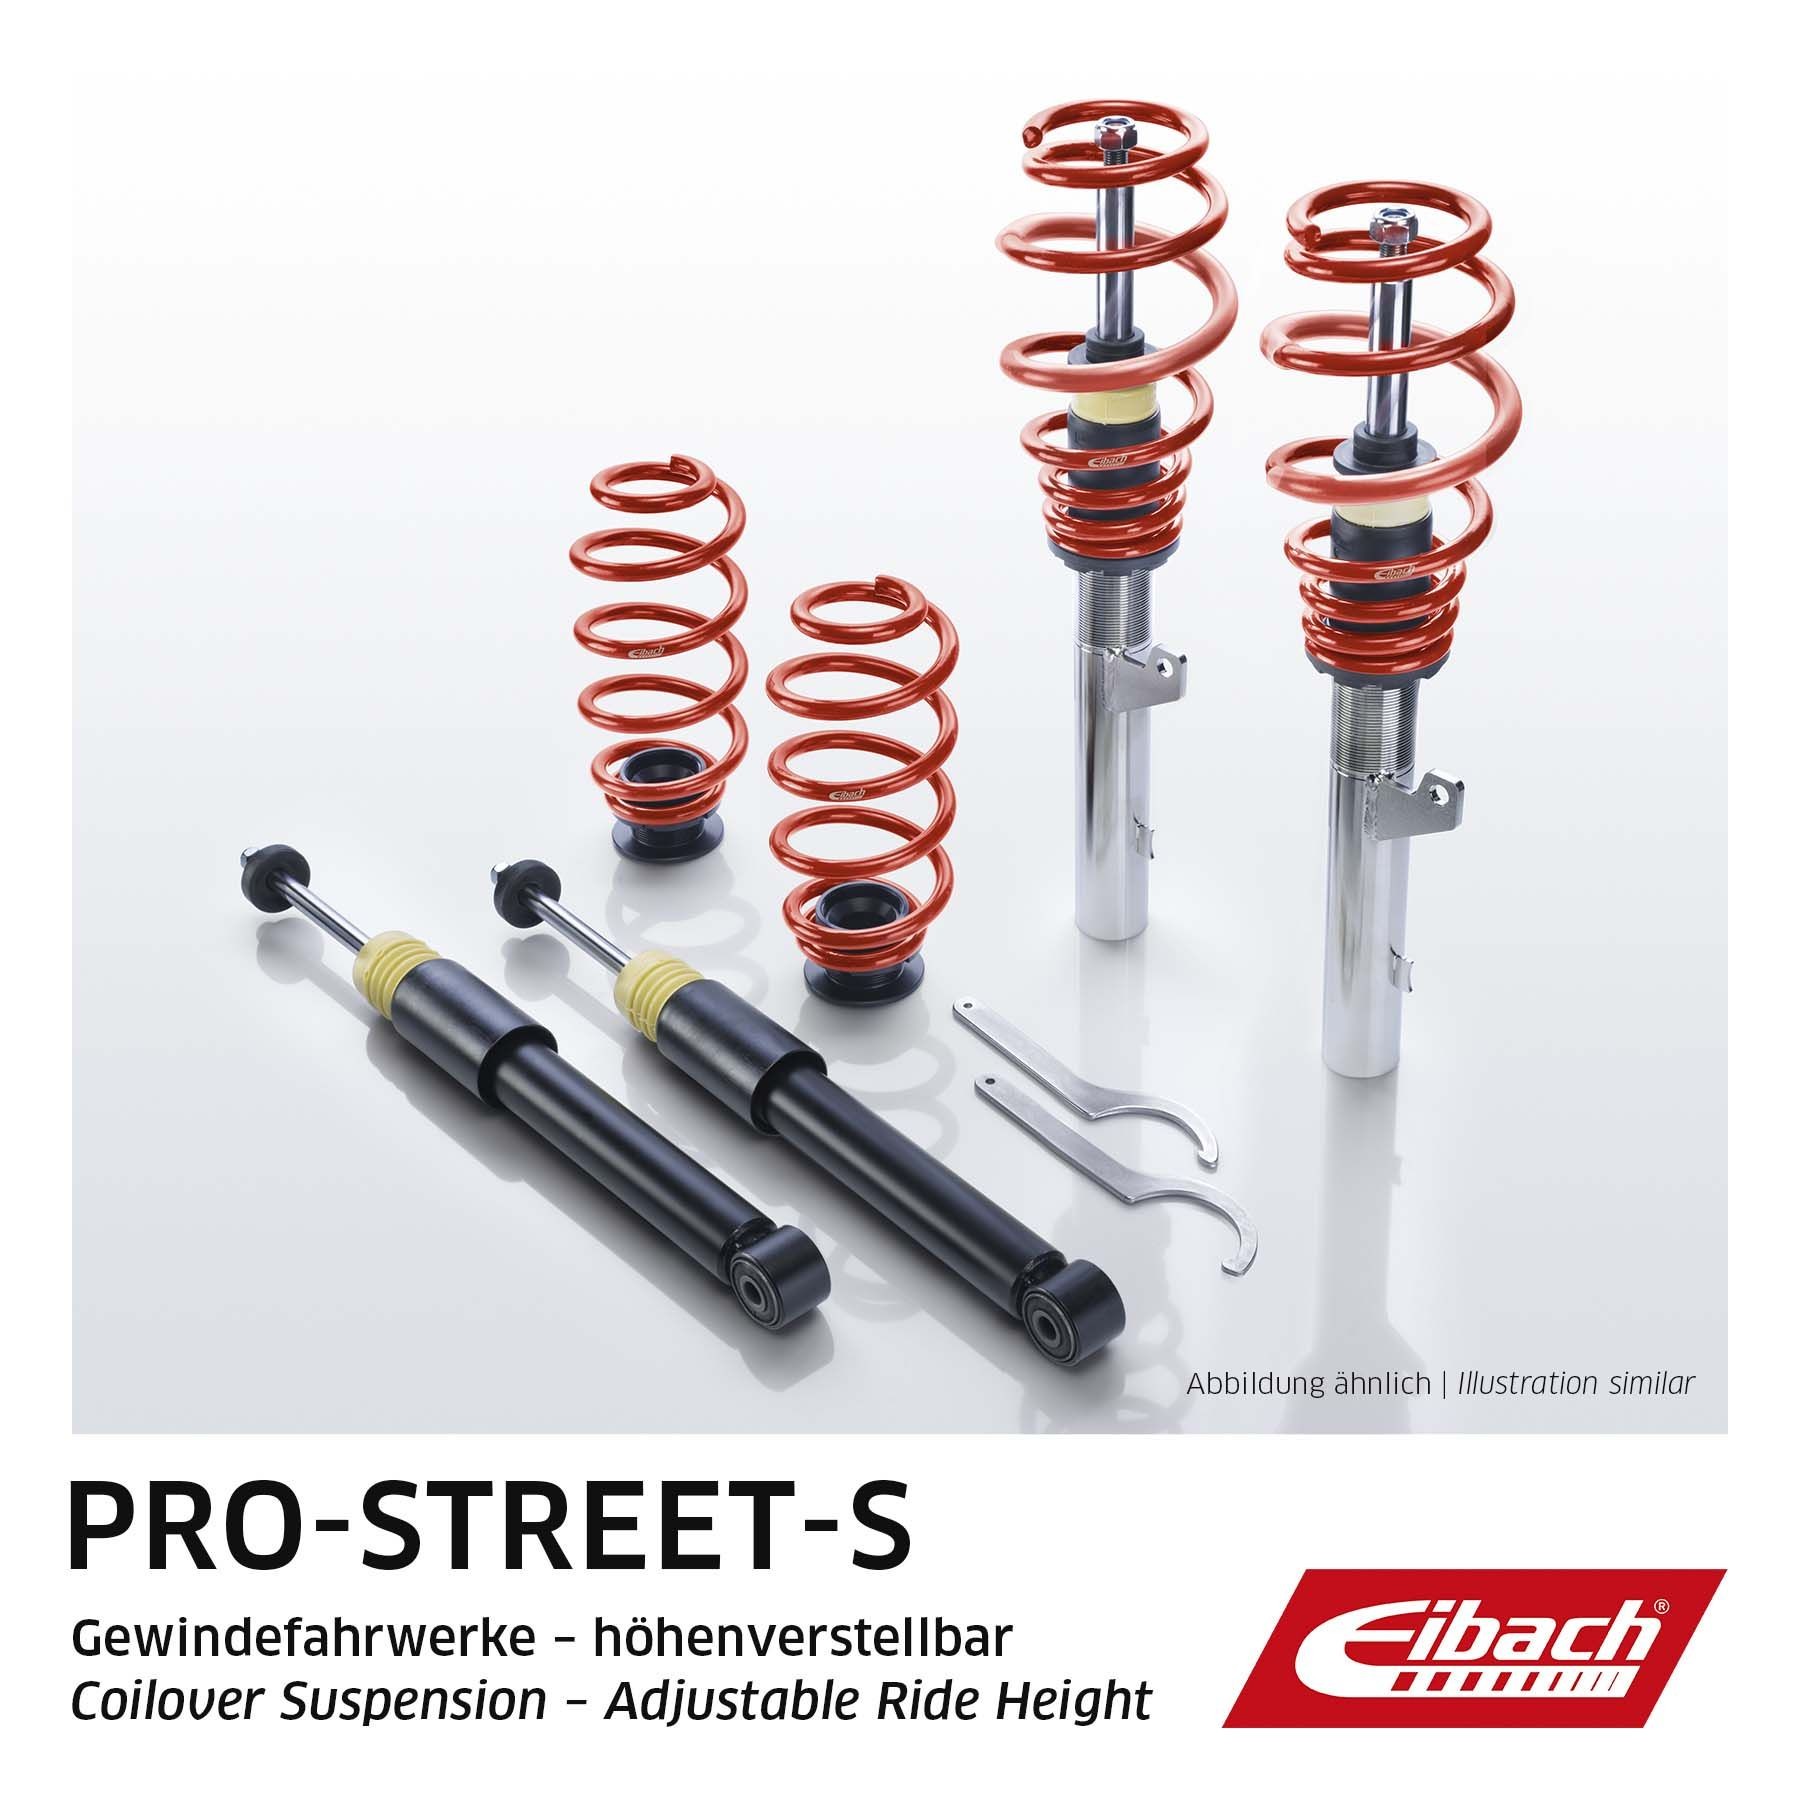 65850020322 EIBACH Pro-Street-S PSS65850020322 Suspension kit, coil springs / shock absorbers Passat 3b5 1.8 Syncro/4motion 125 hp Petrol 2000 price